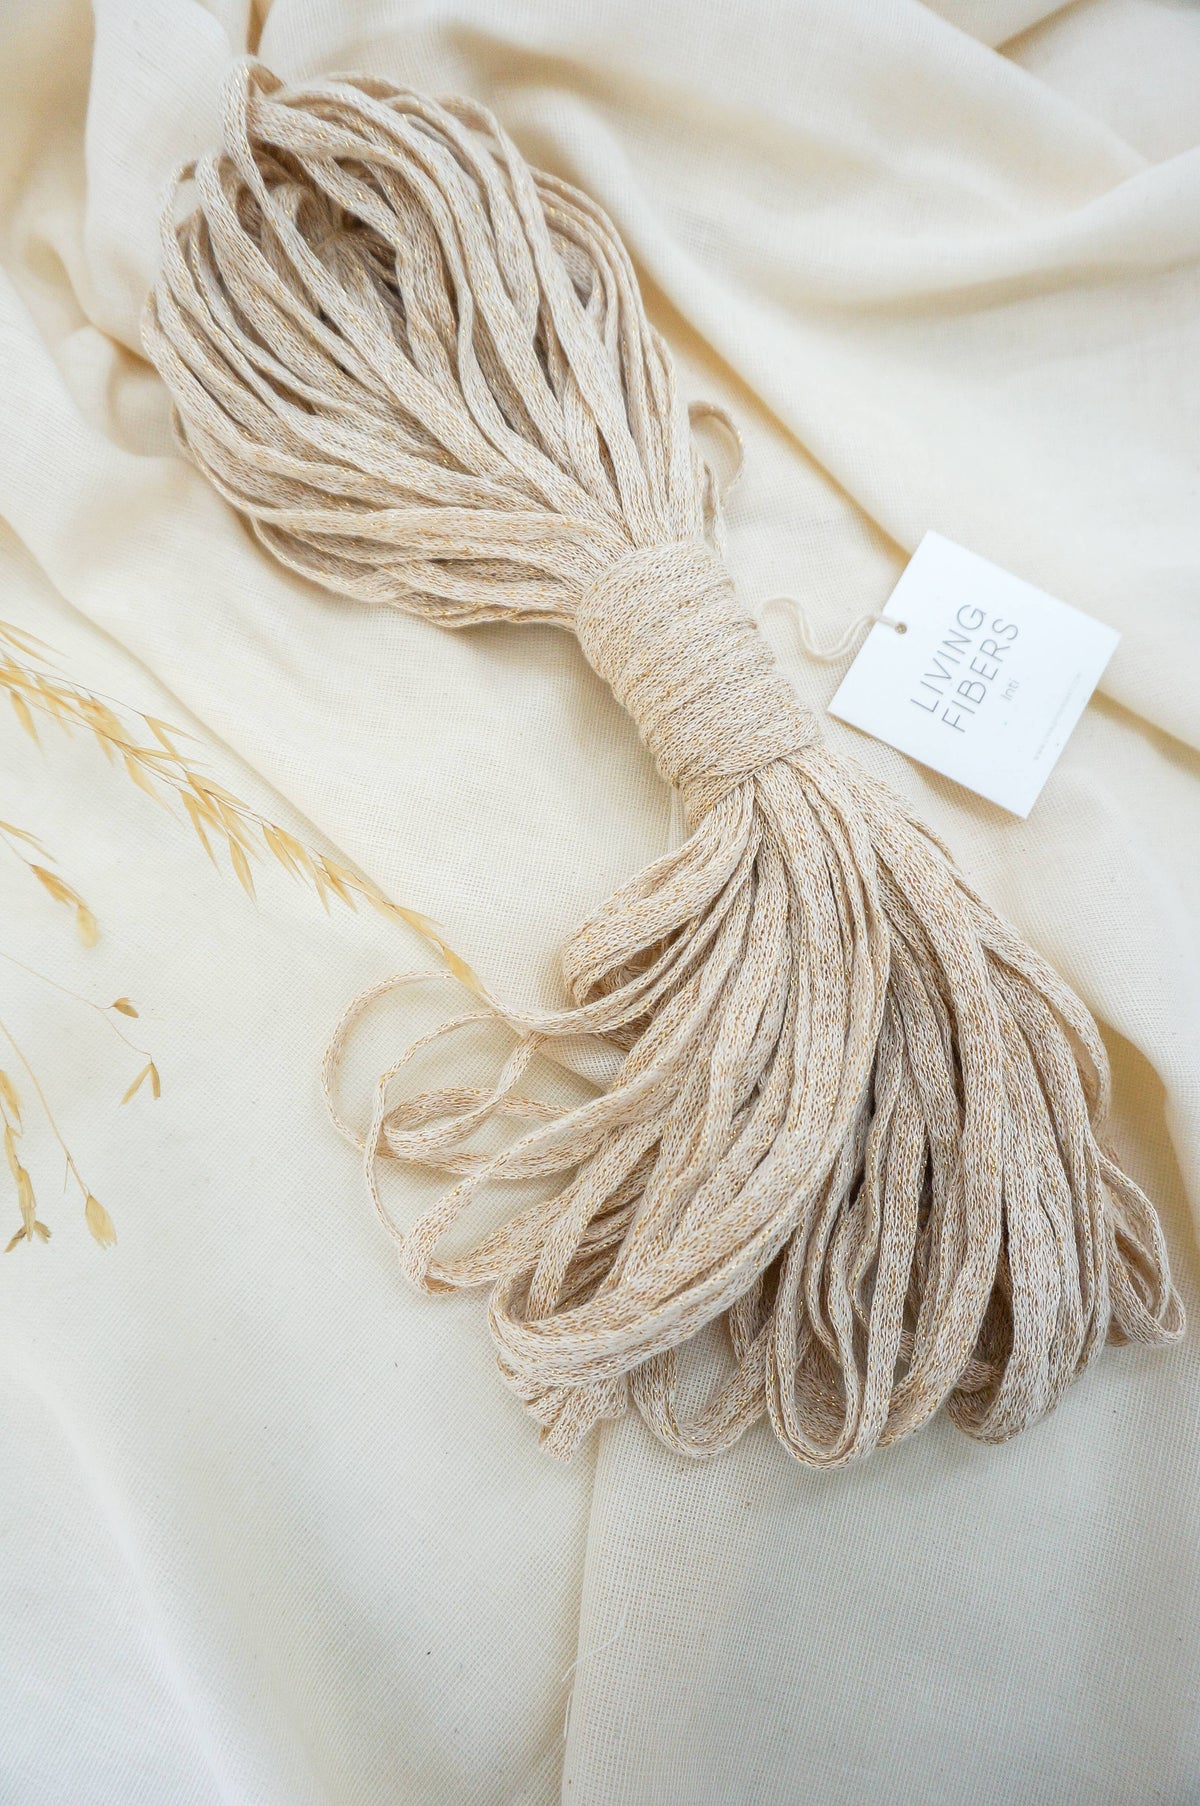 Living Fibers - Lurex rope for crafts or macrame